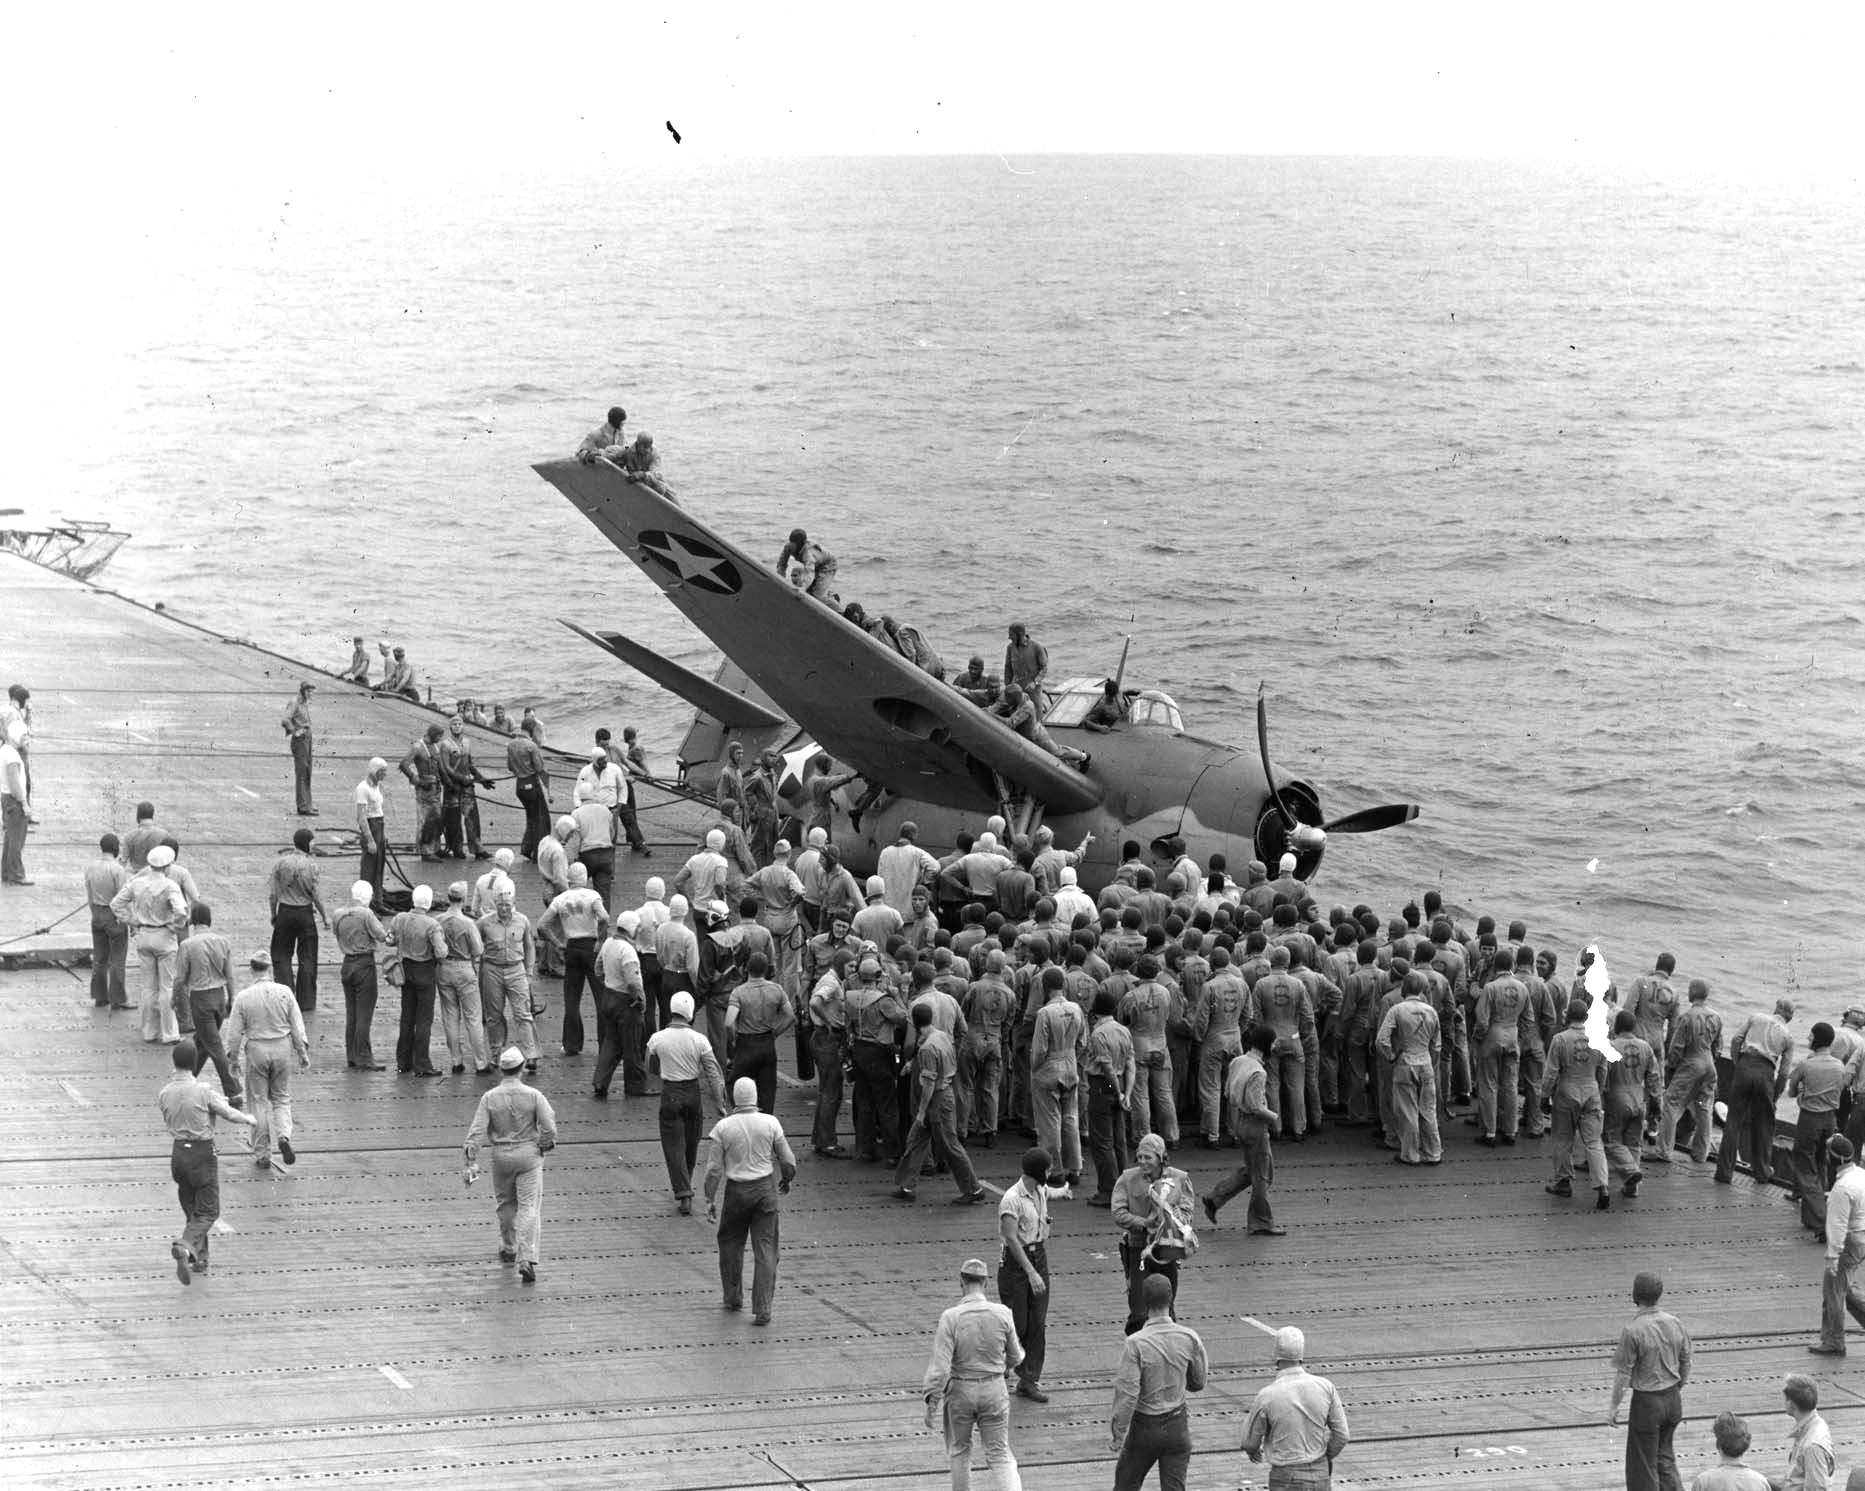 The USS Enterprise conducted flight training when steaming from Hawaii to Tonga on 23 Jul 1942. Here, upon landing, a TBF Avenger slid off the flight deck into the catwalks; no injuries.